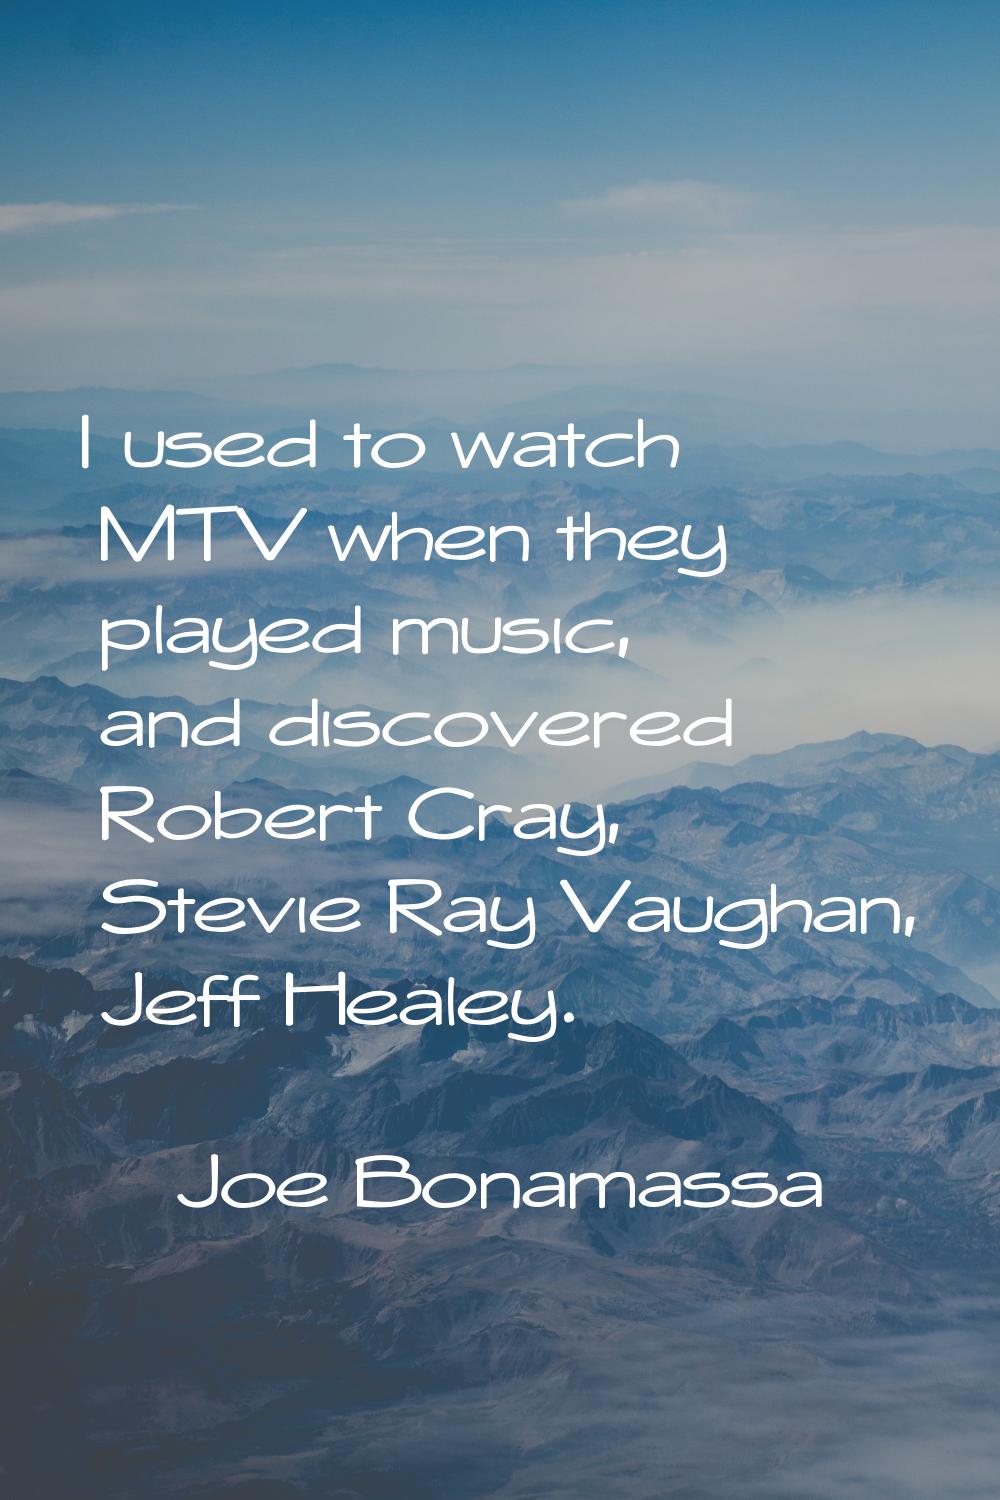 I used to watch MTV when they played music, and discovered Robert Cray, Stevie Ray Vaughan, Jeff He